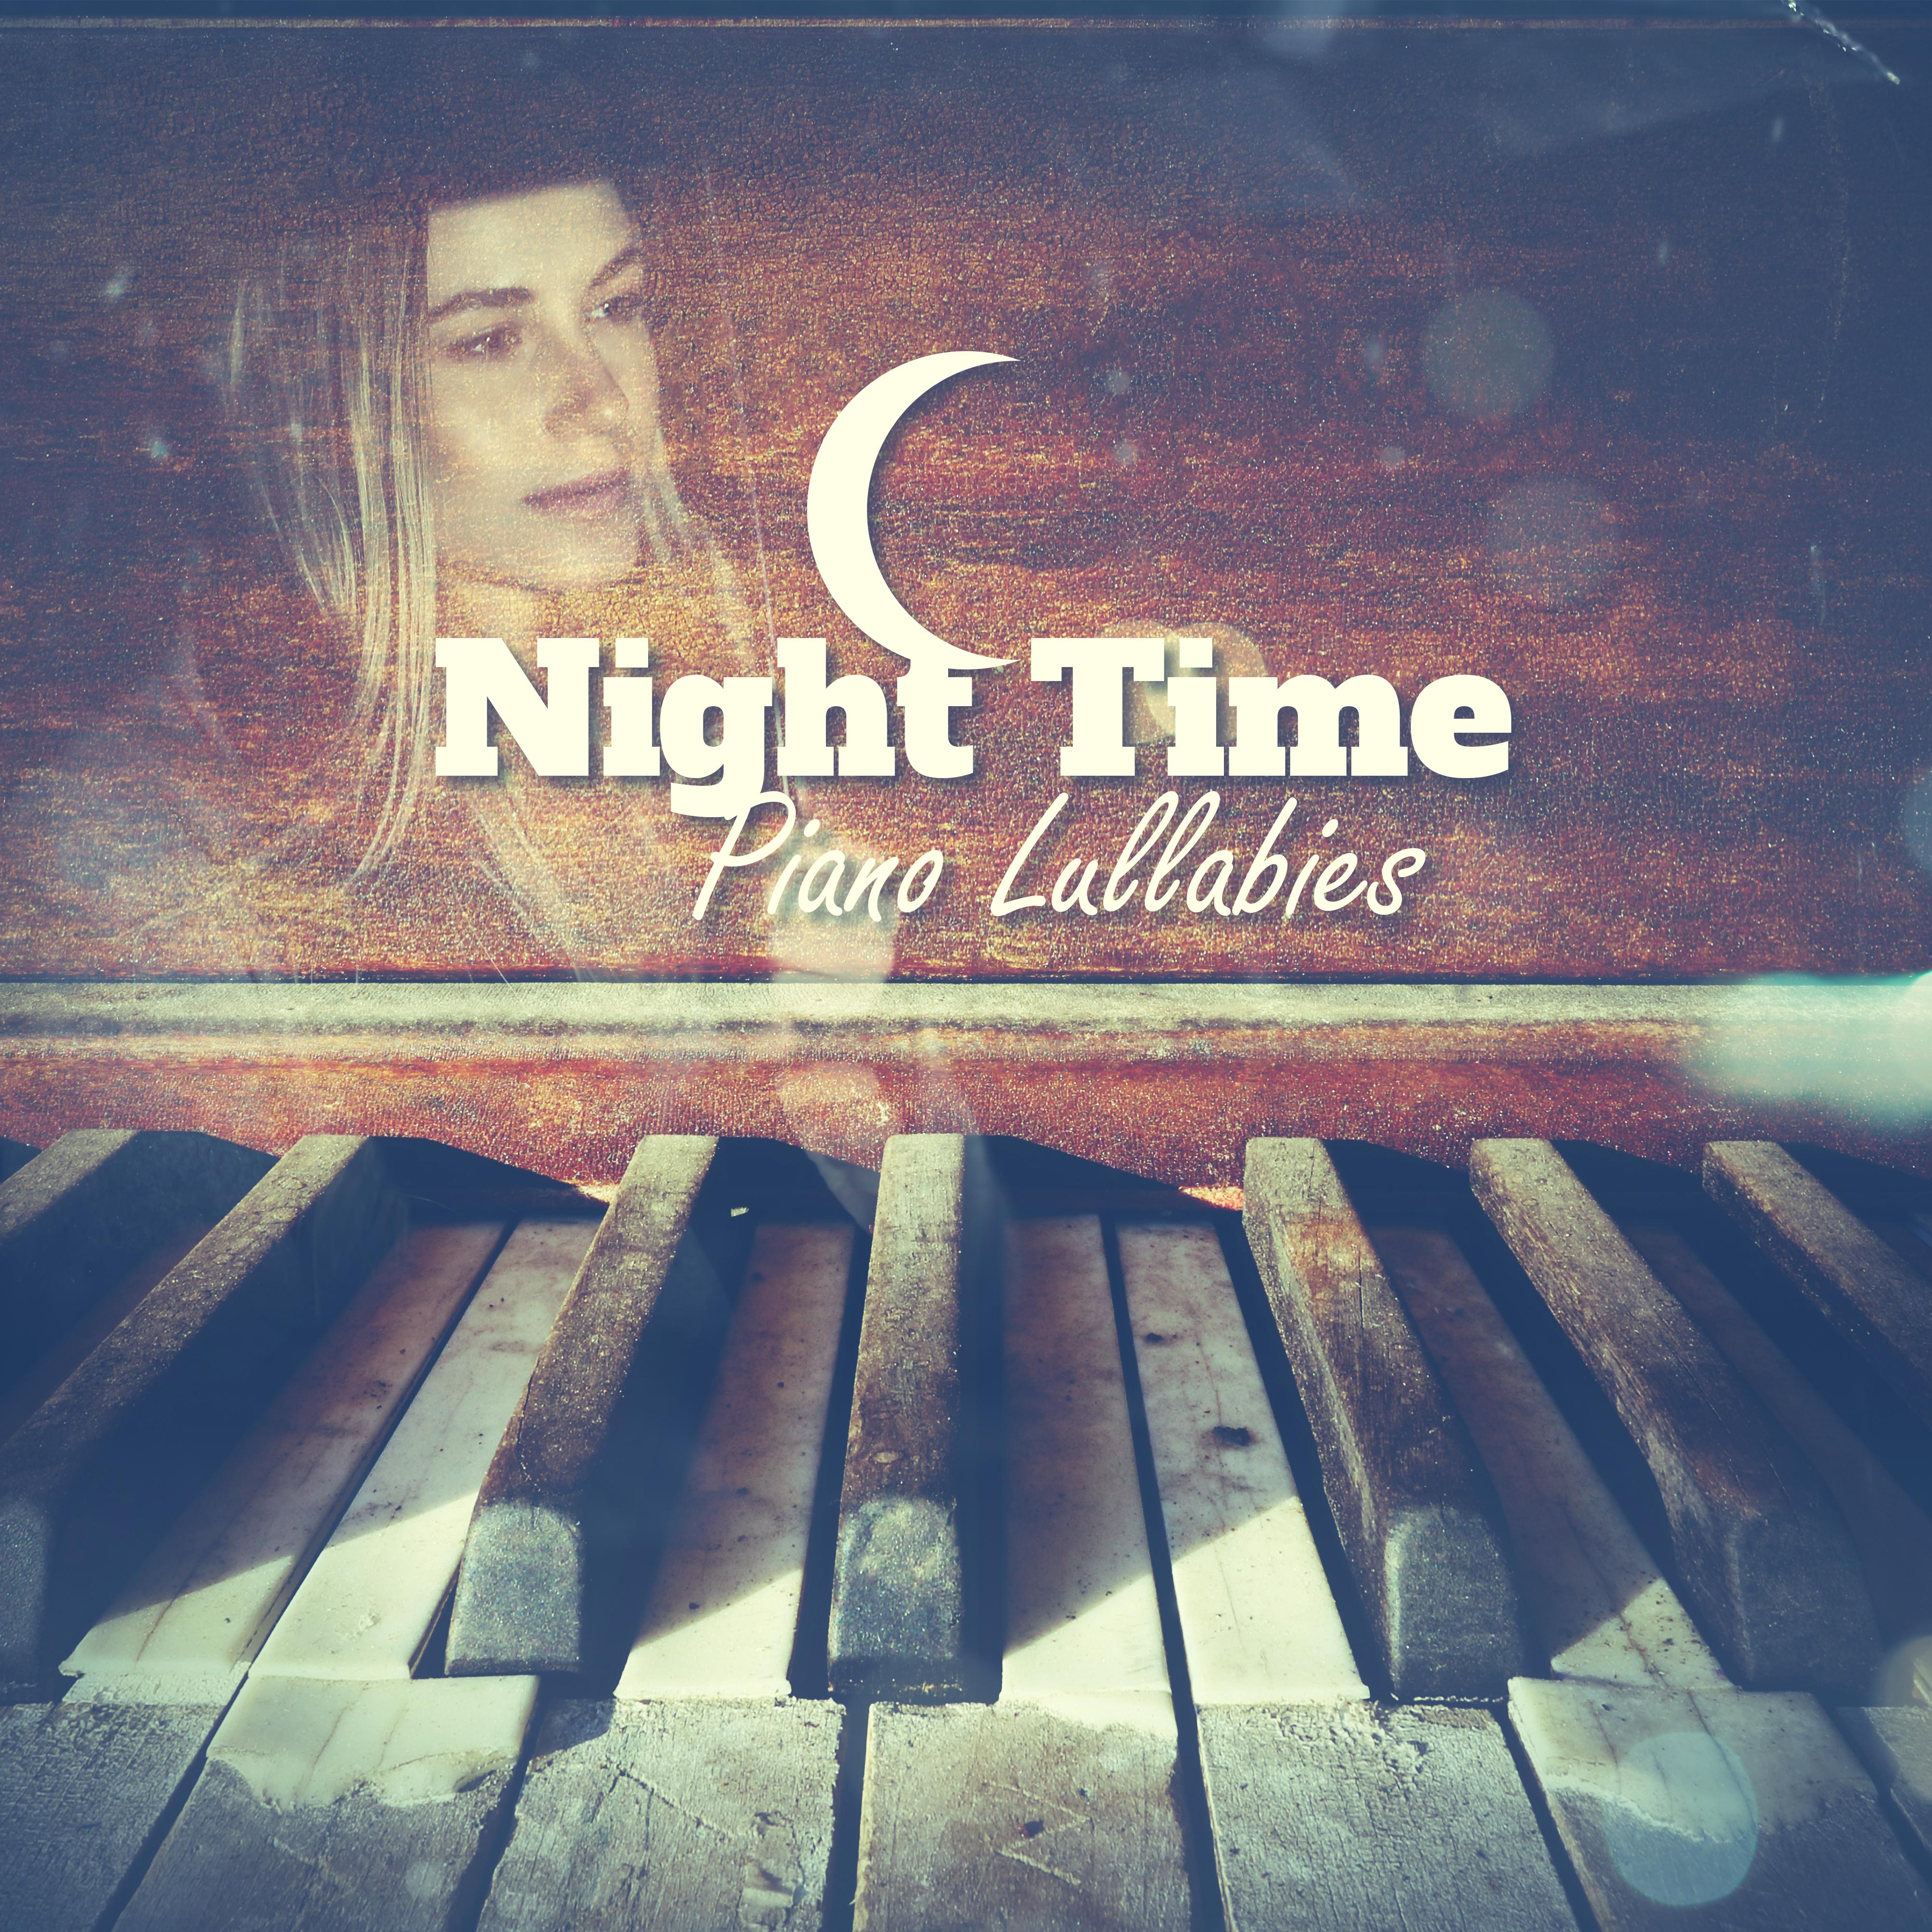 Night Time Piano Lullabies: Compilation of 15 Piano Jazz Beautiful Songs for Calm Sleep, Stress Relief, Cure Insomnia